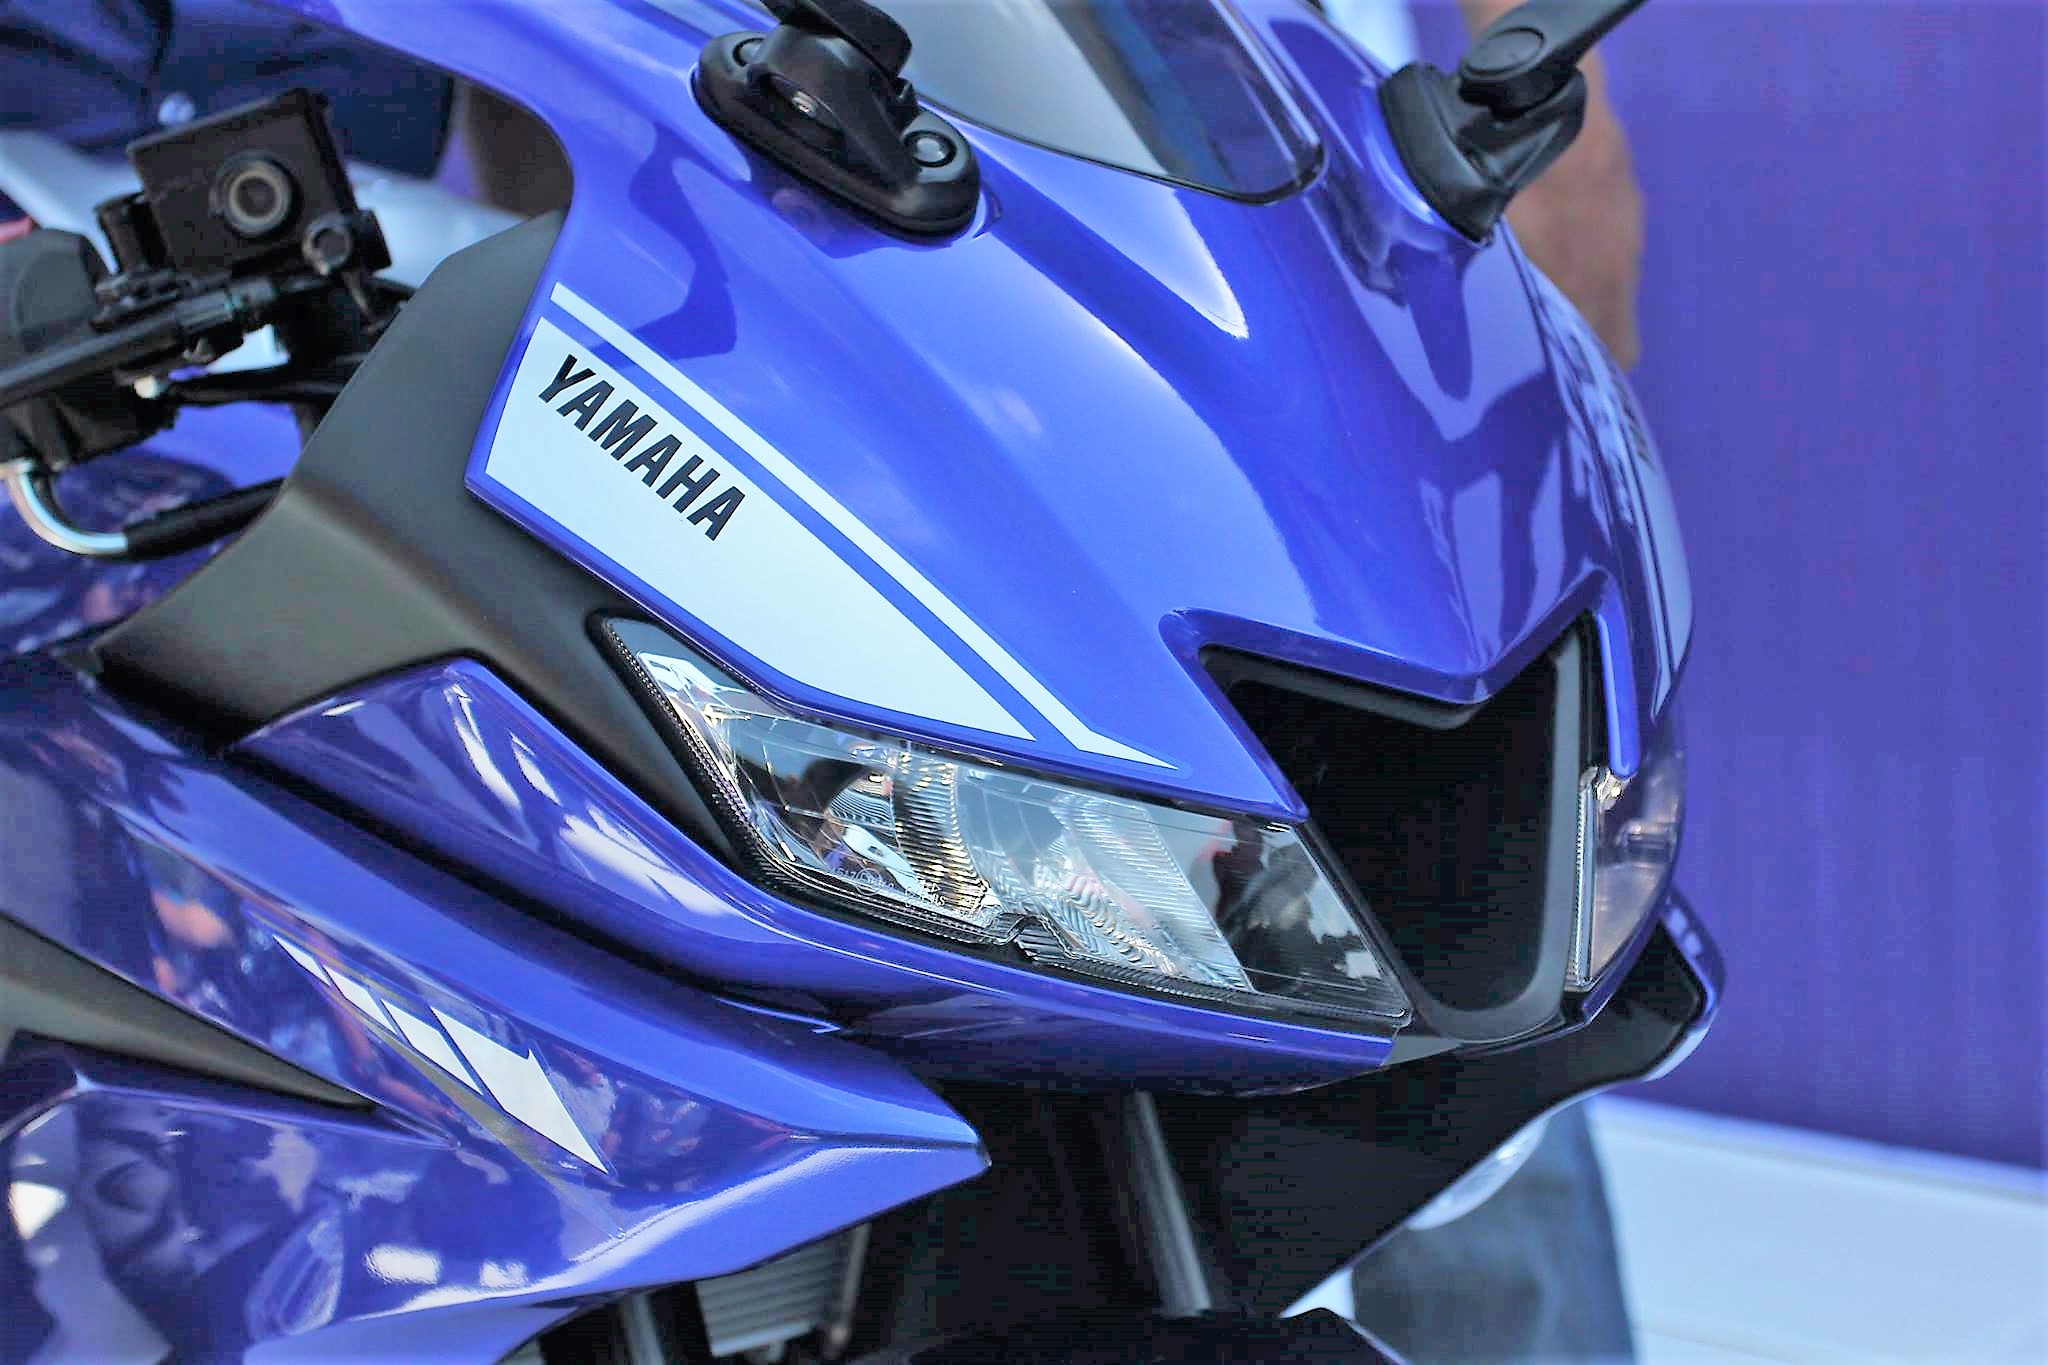 Mega Photo Gallery of Yamaha R15 Version 3 | Official Specs & Shades Updated